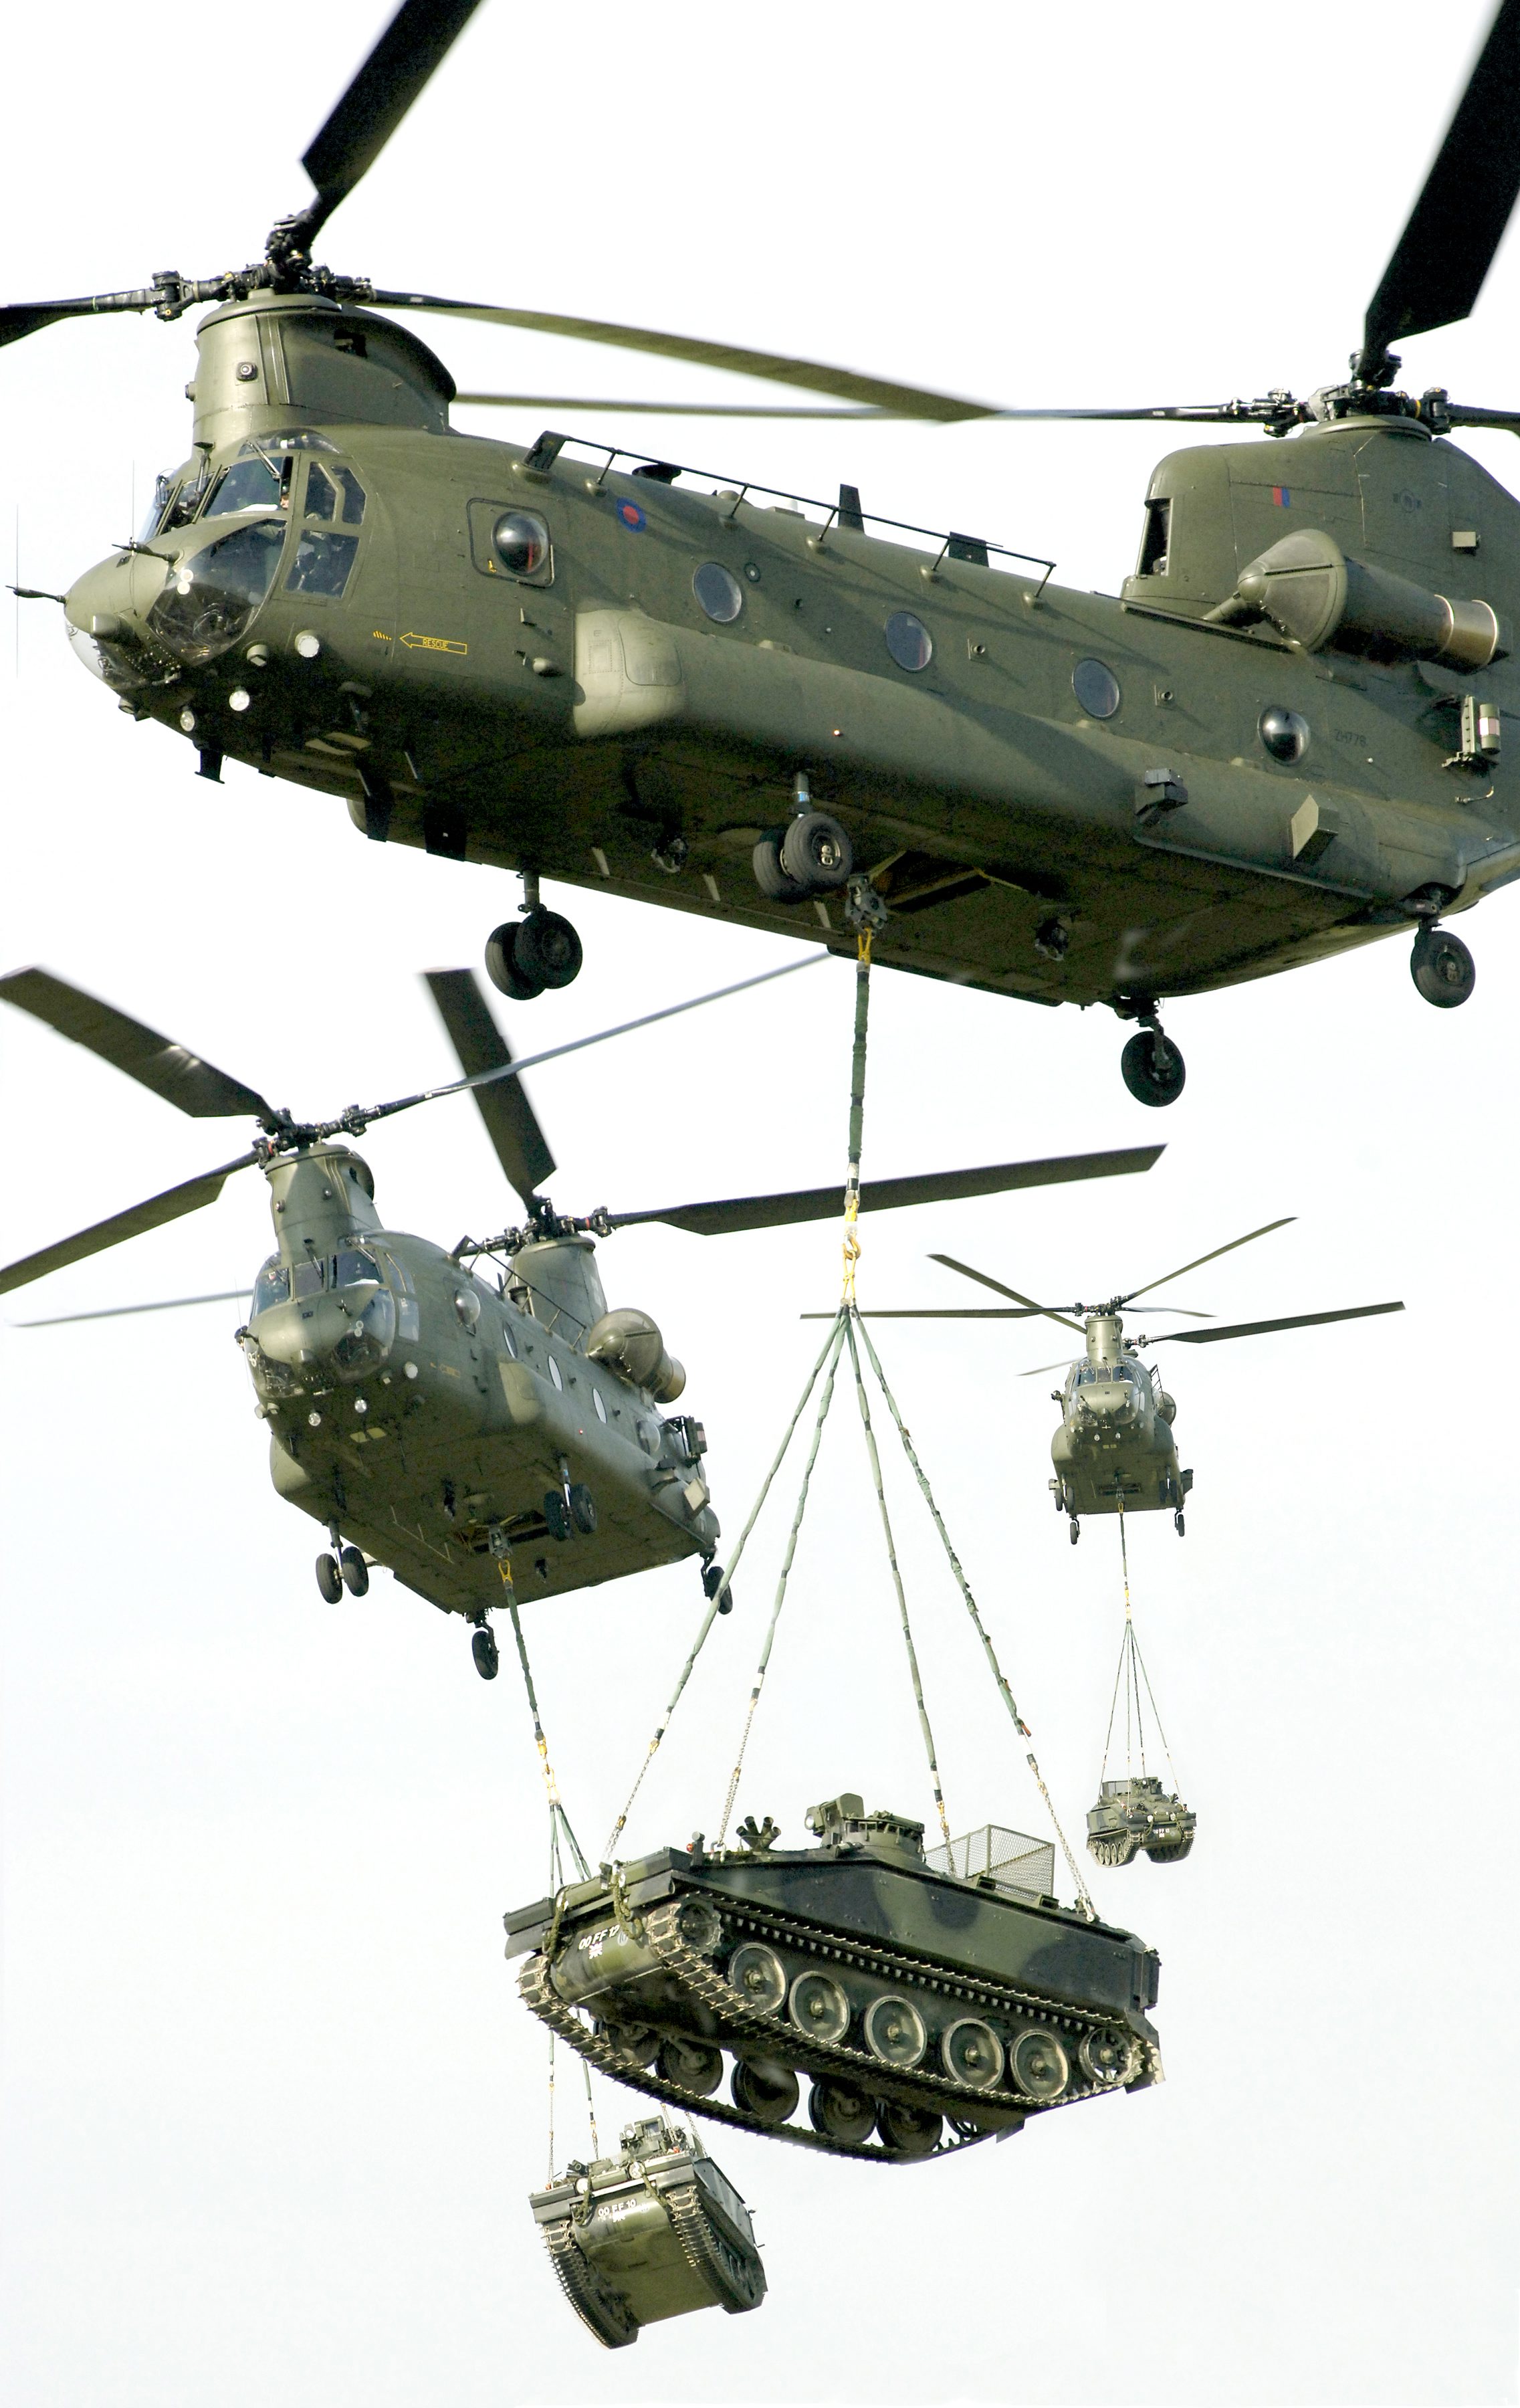 Big Army Helicopter